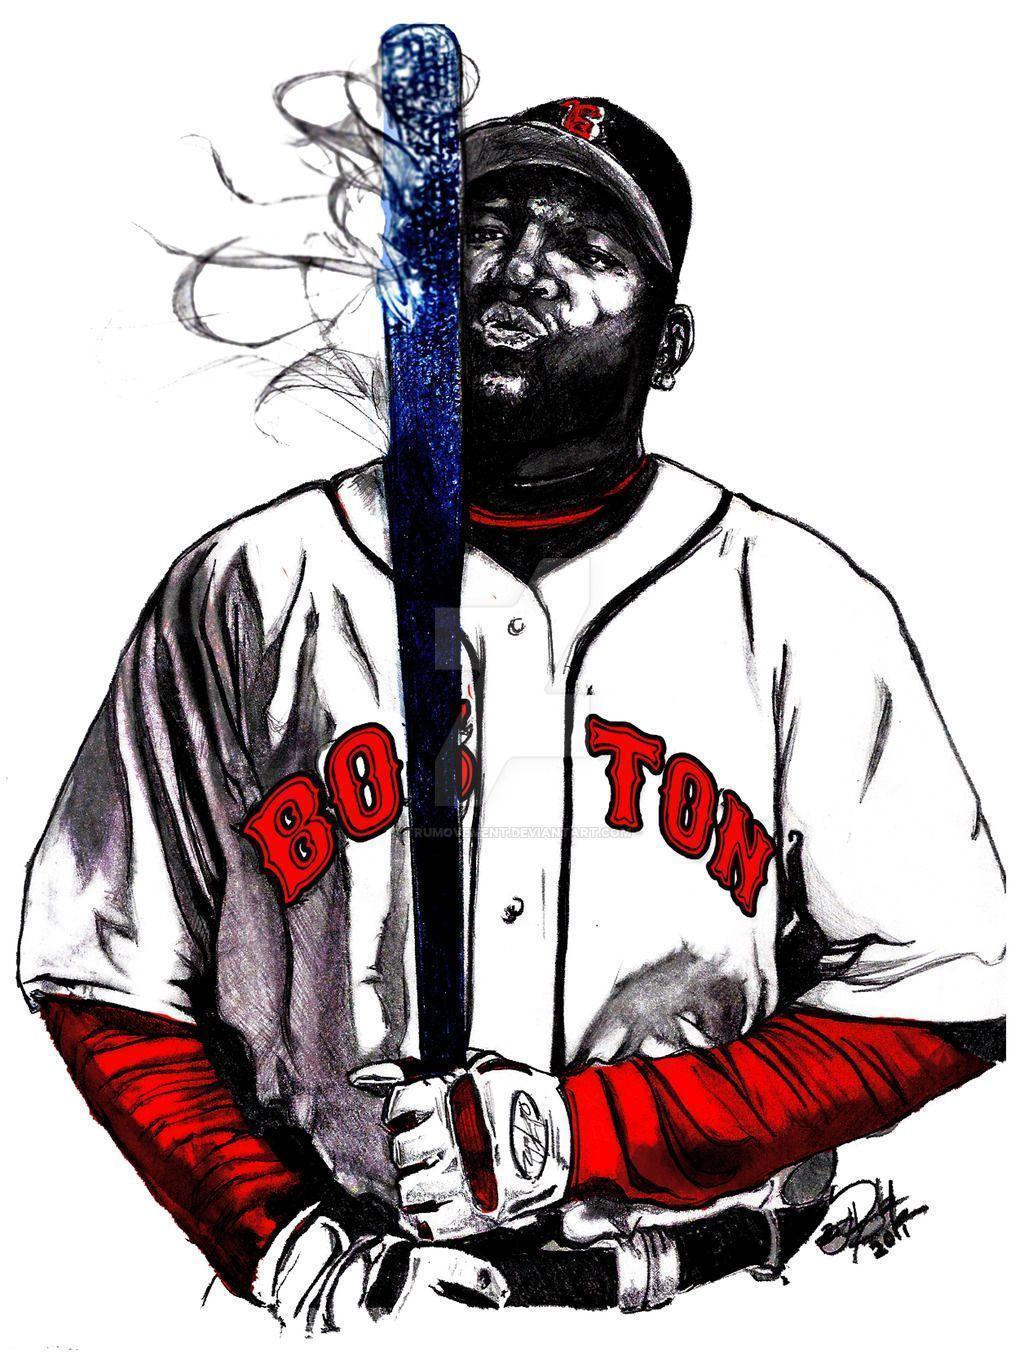 Complete Step by Step tutorial How To Draw David Ortiz